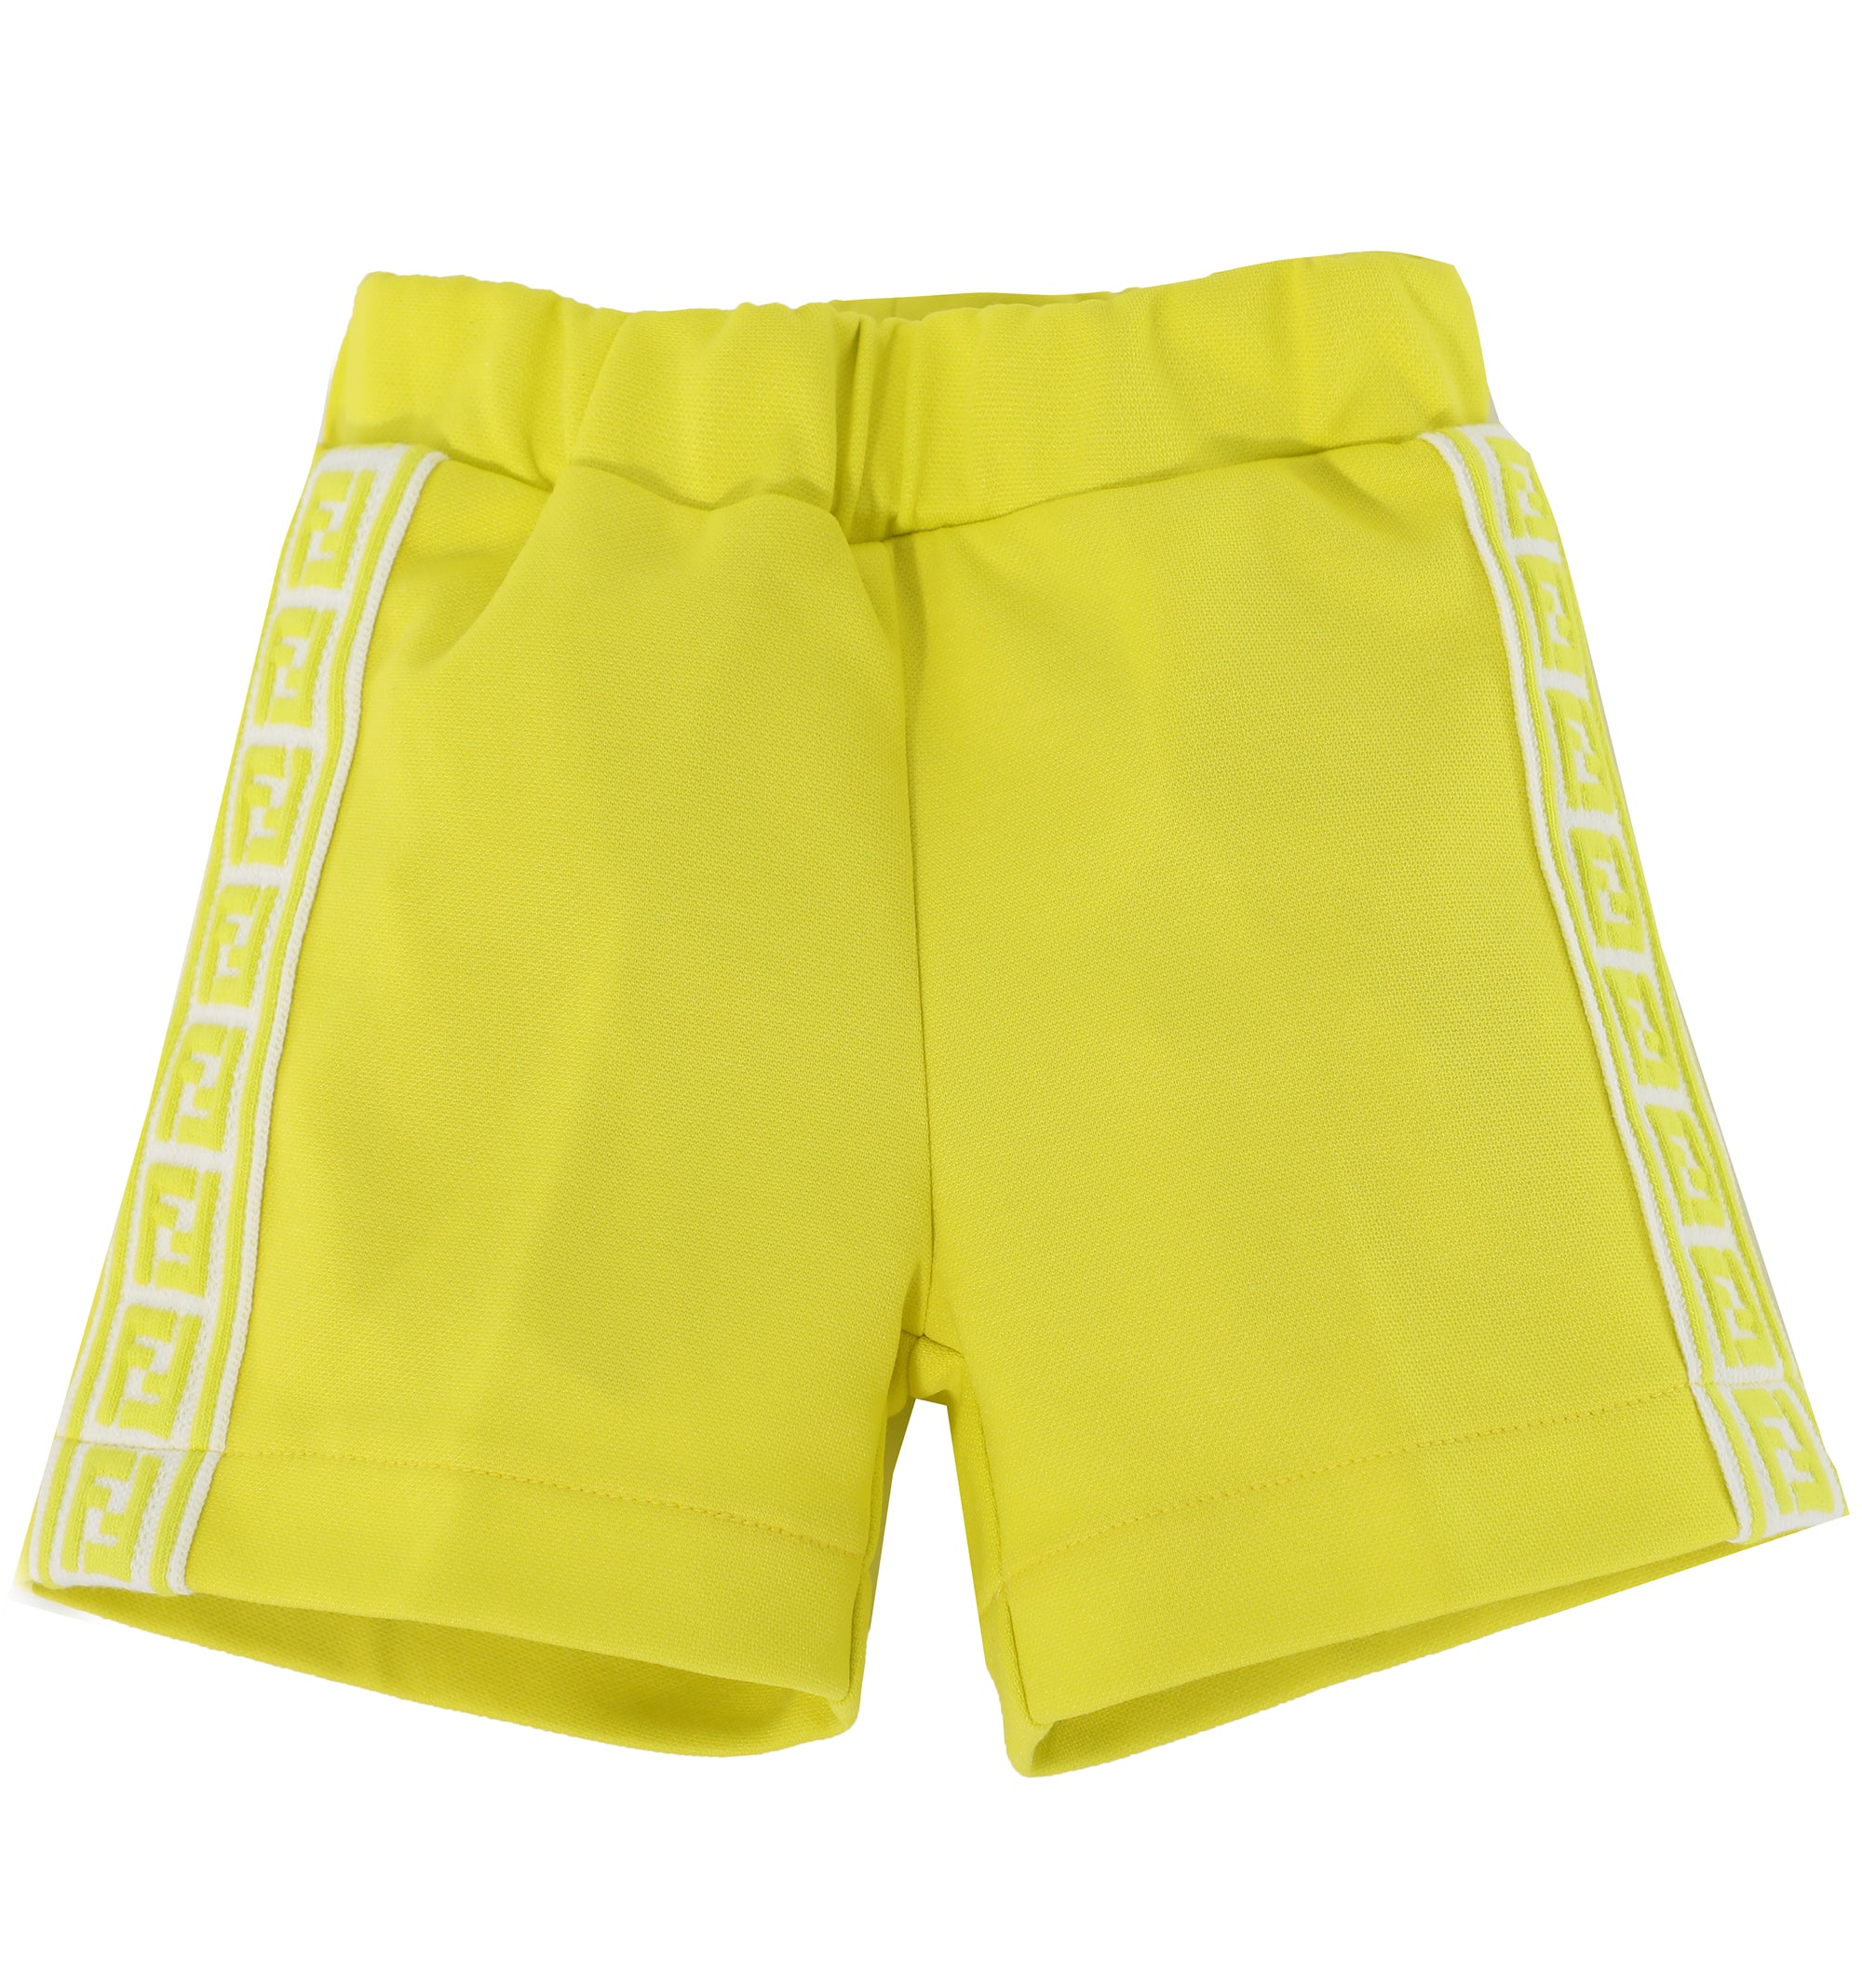 TRACK SHORTS W| 3D FF ON SIDES AND SNAPS - LEMON